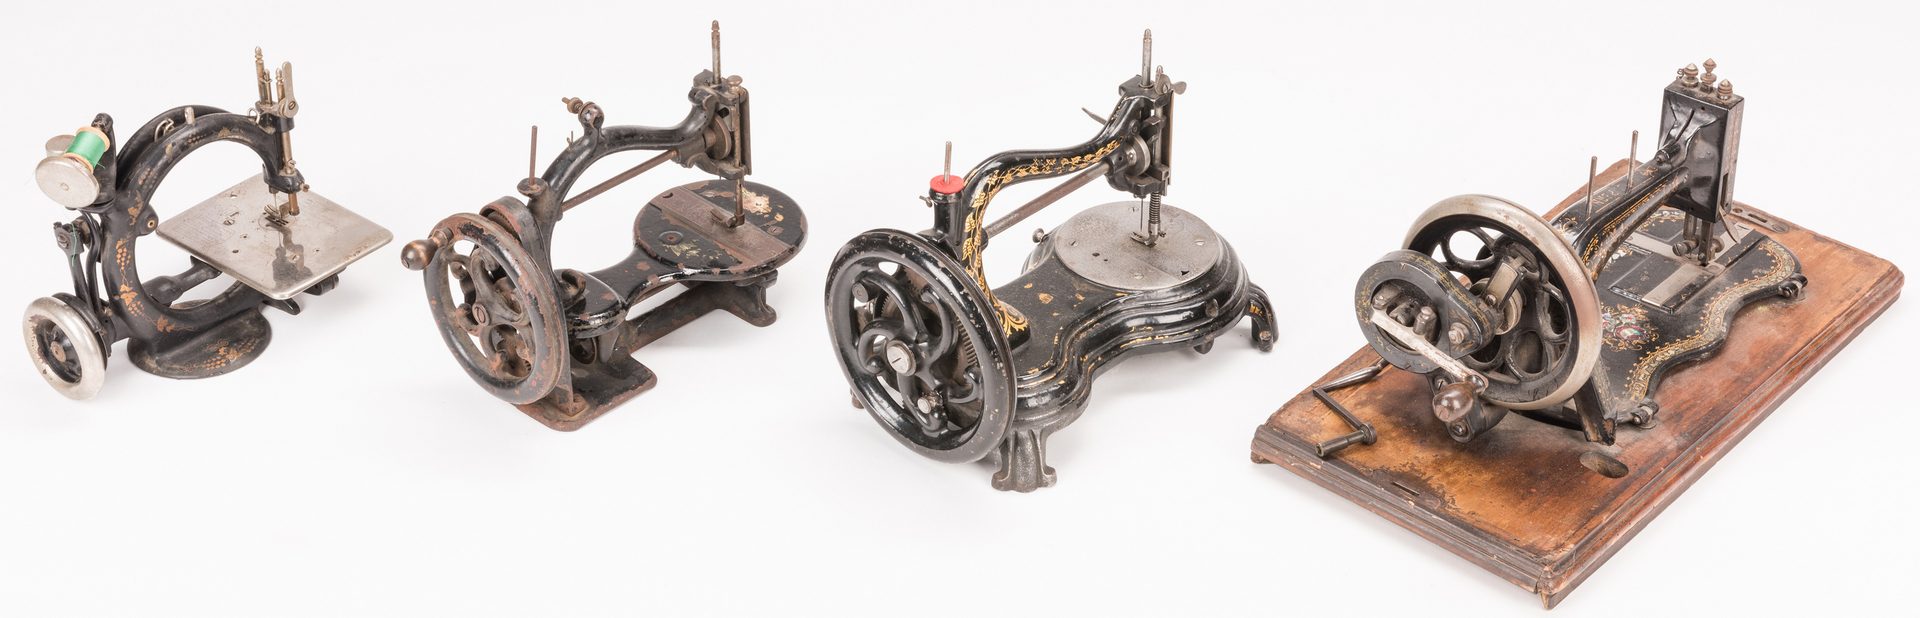 Lot 843: Four 19th c. Cast Iron Sewing Machines